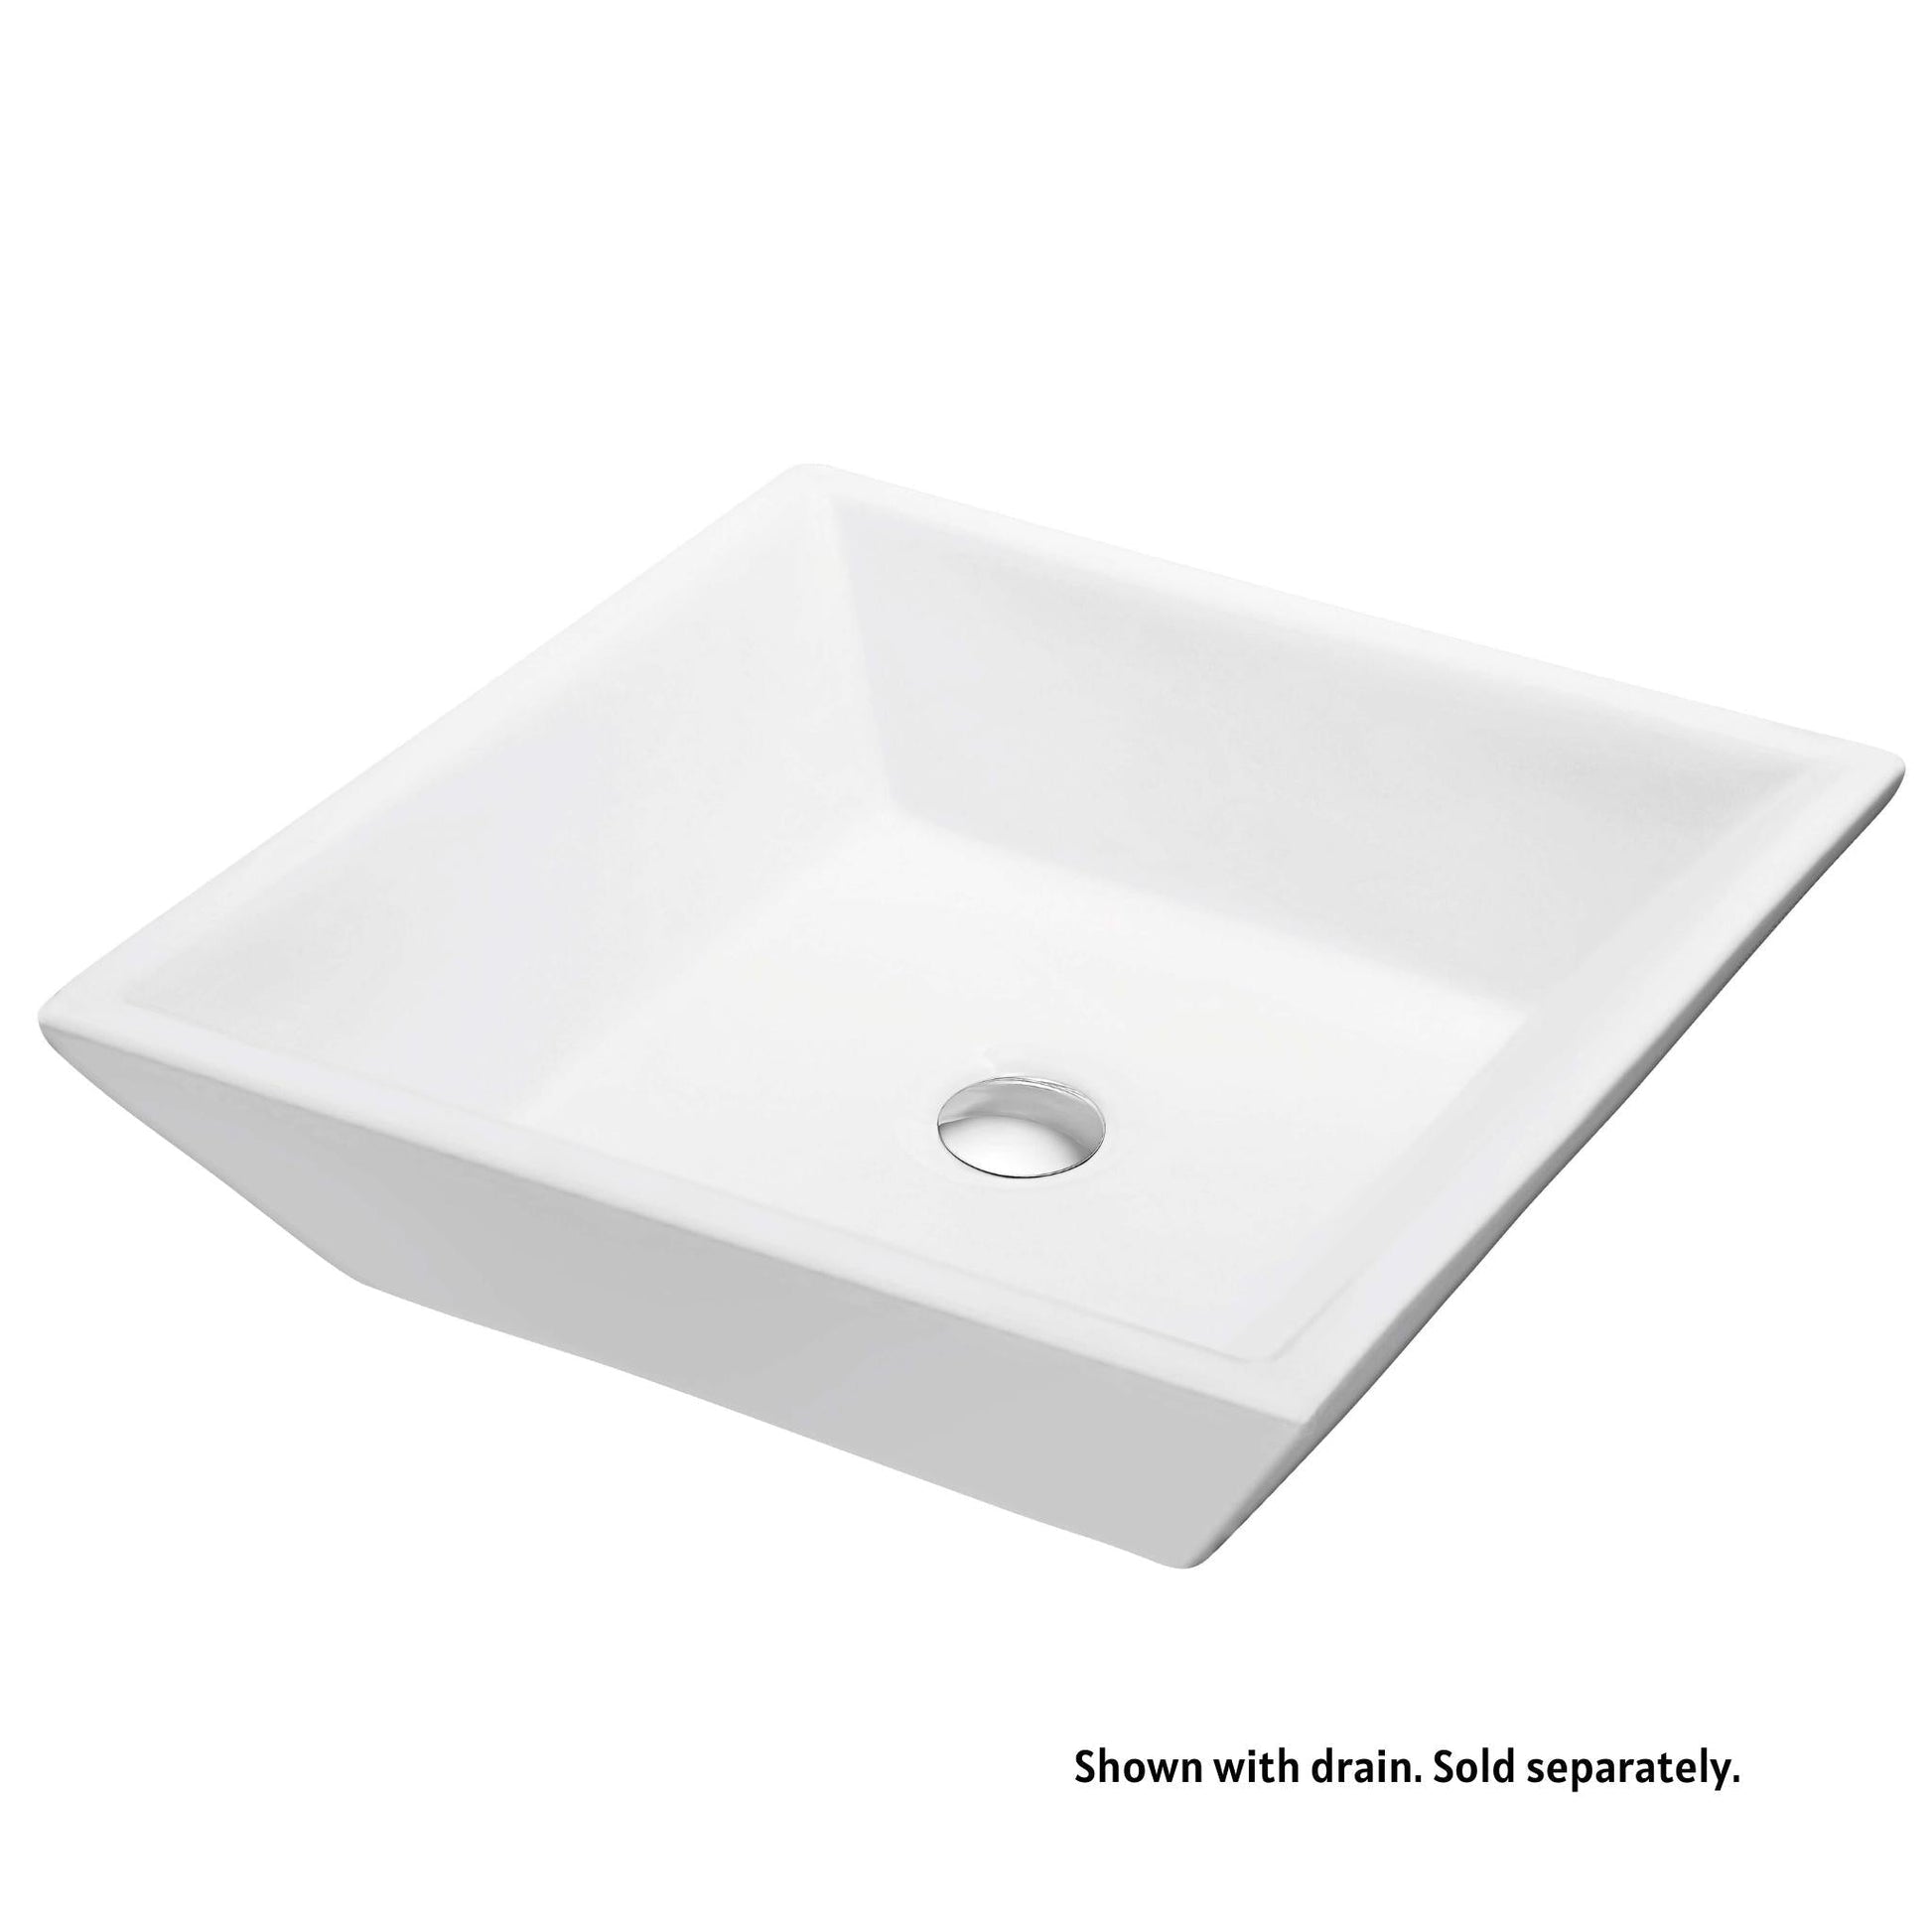 Blossom Sydney 16" x 16" White Square Single Vessel Ceramic Top-Mount Sink With Overflow